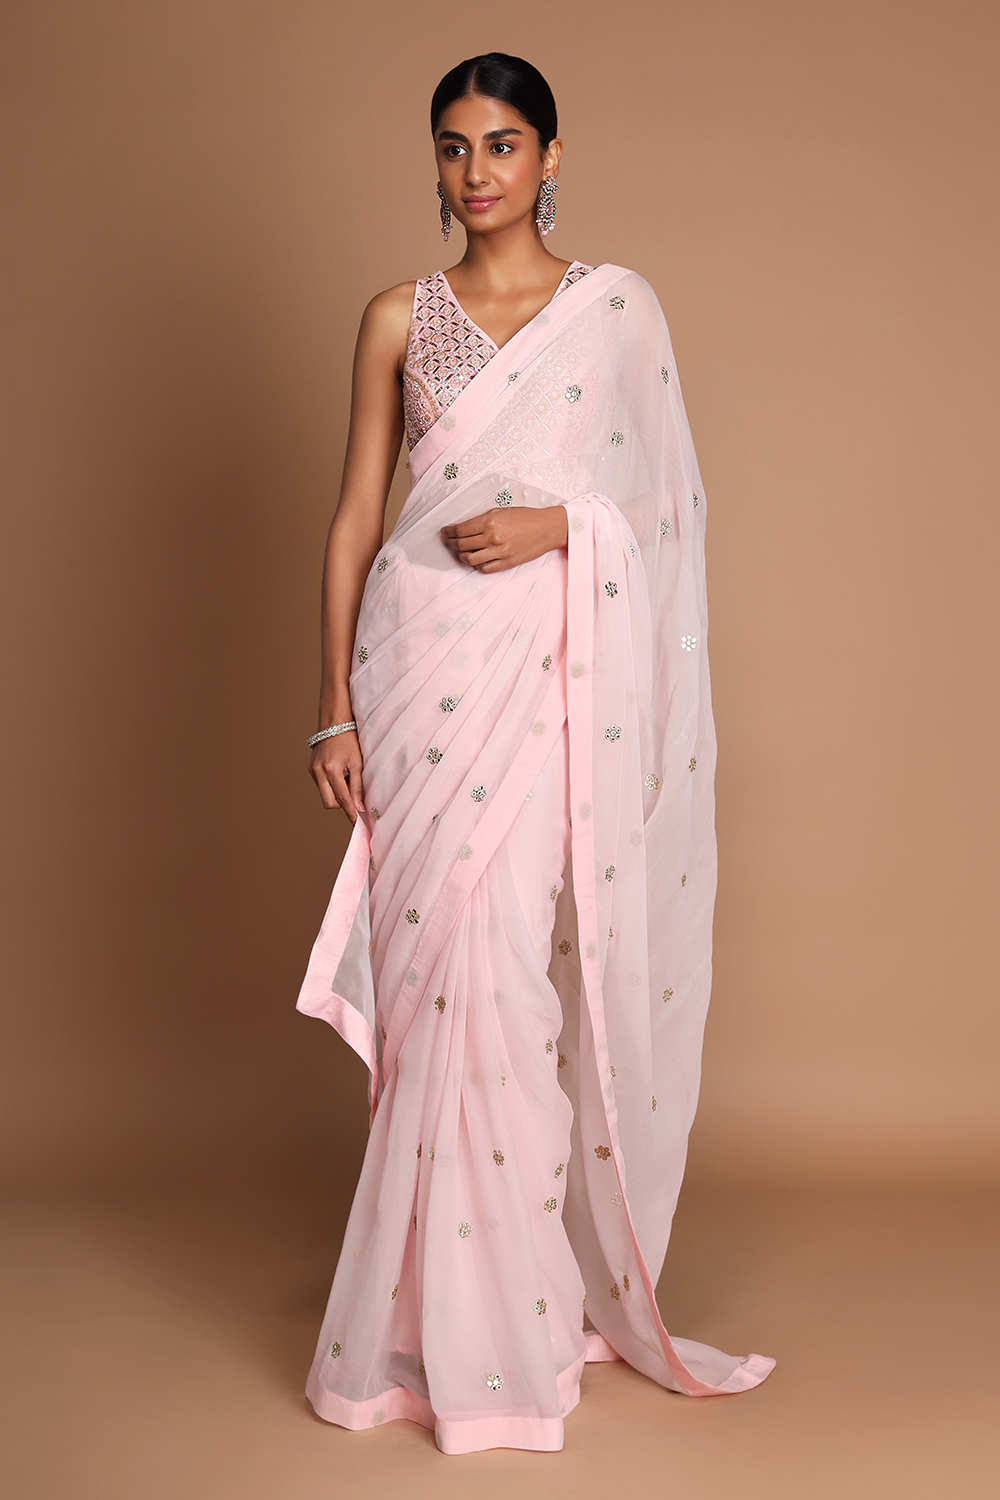 The Ultimate Checklist To Buy A Saree For Your Wedding Day!